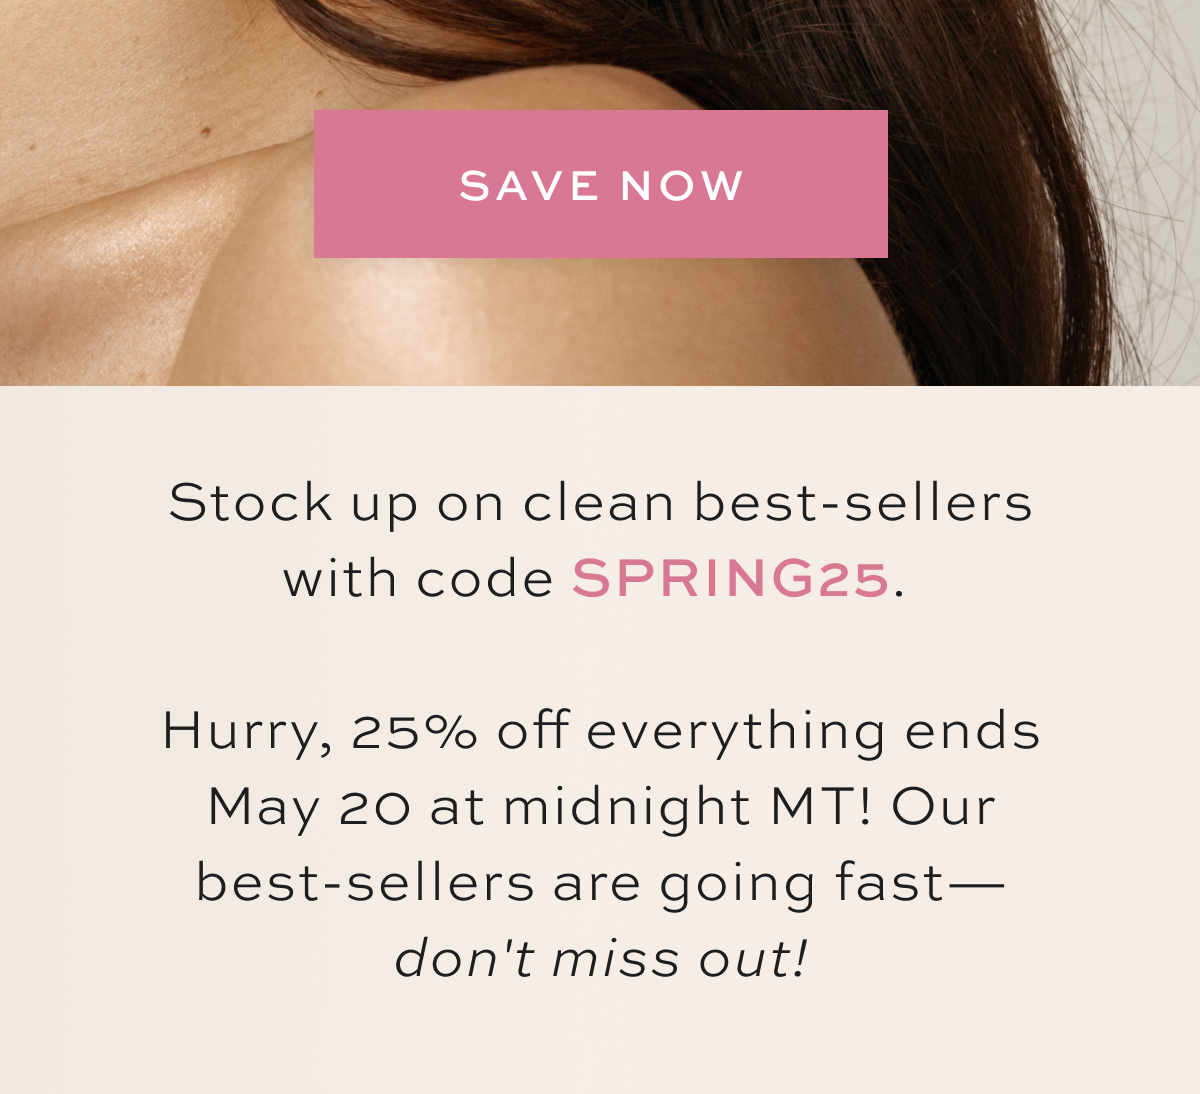 Get 25% off your entire purchase with code SPRING25, or save 30% when you auto-renew. You only have until midnight MT to claim these savings. Shop NOW, before it’s over!